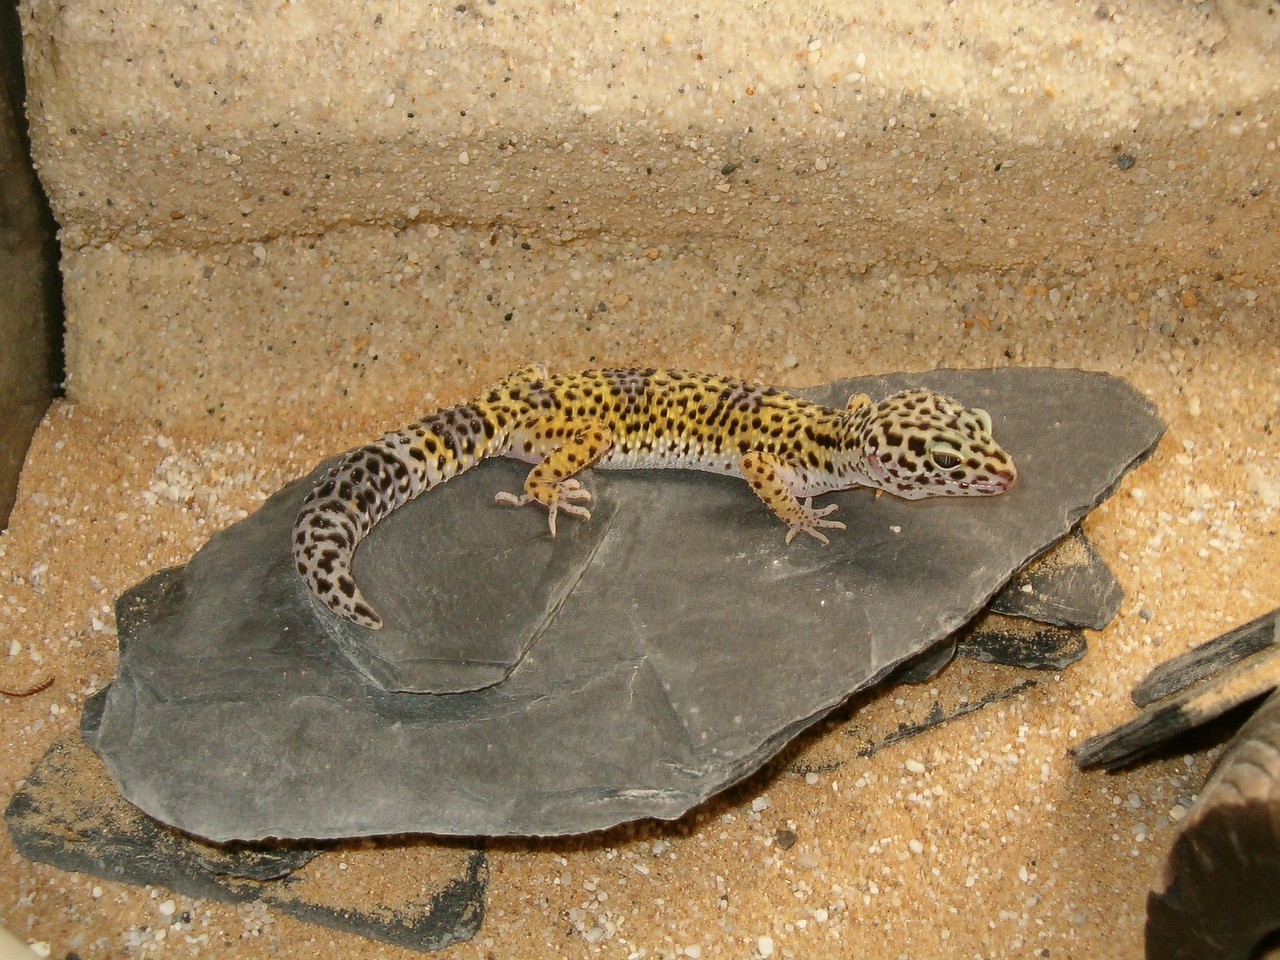 Gecko,reptiles and amphibians